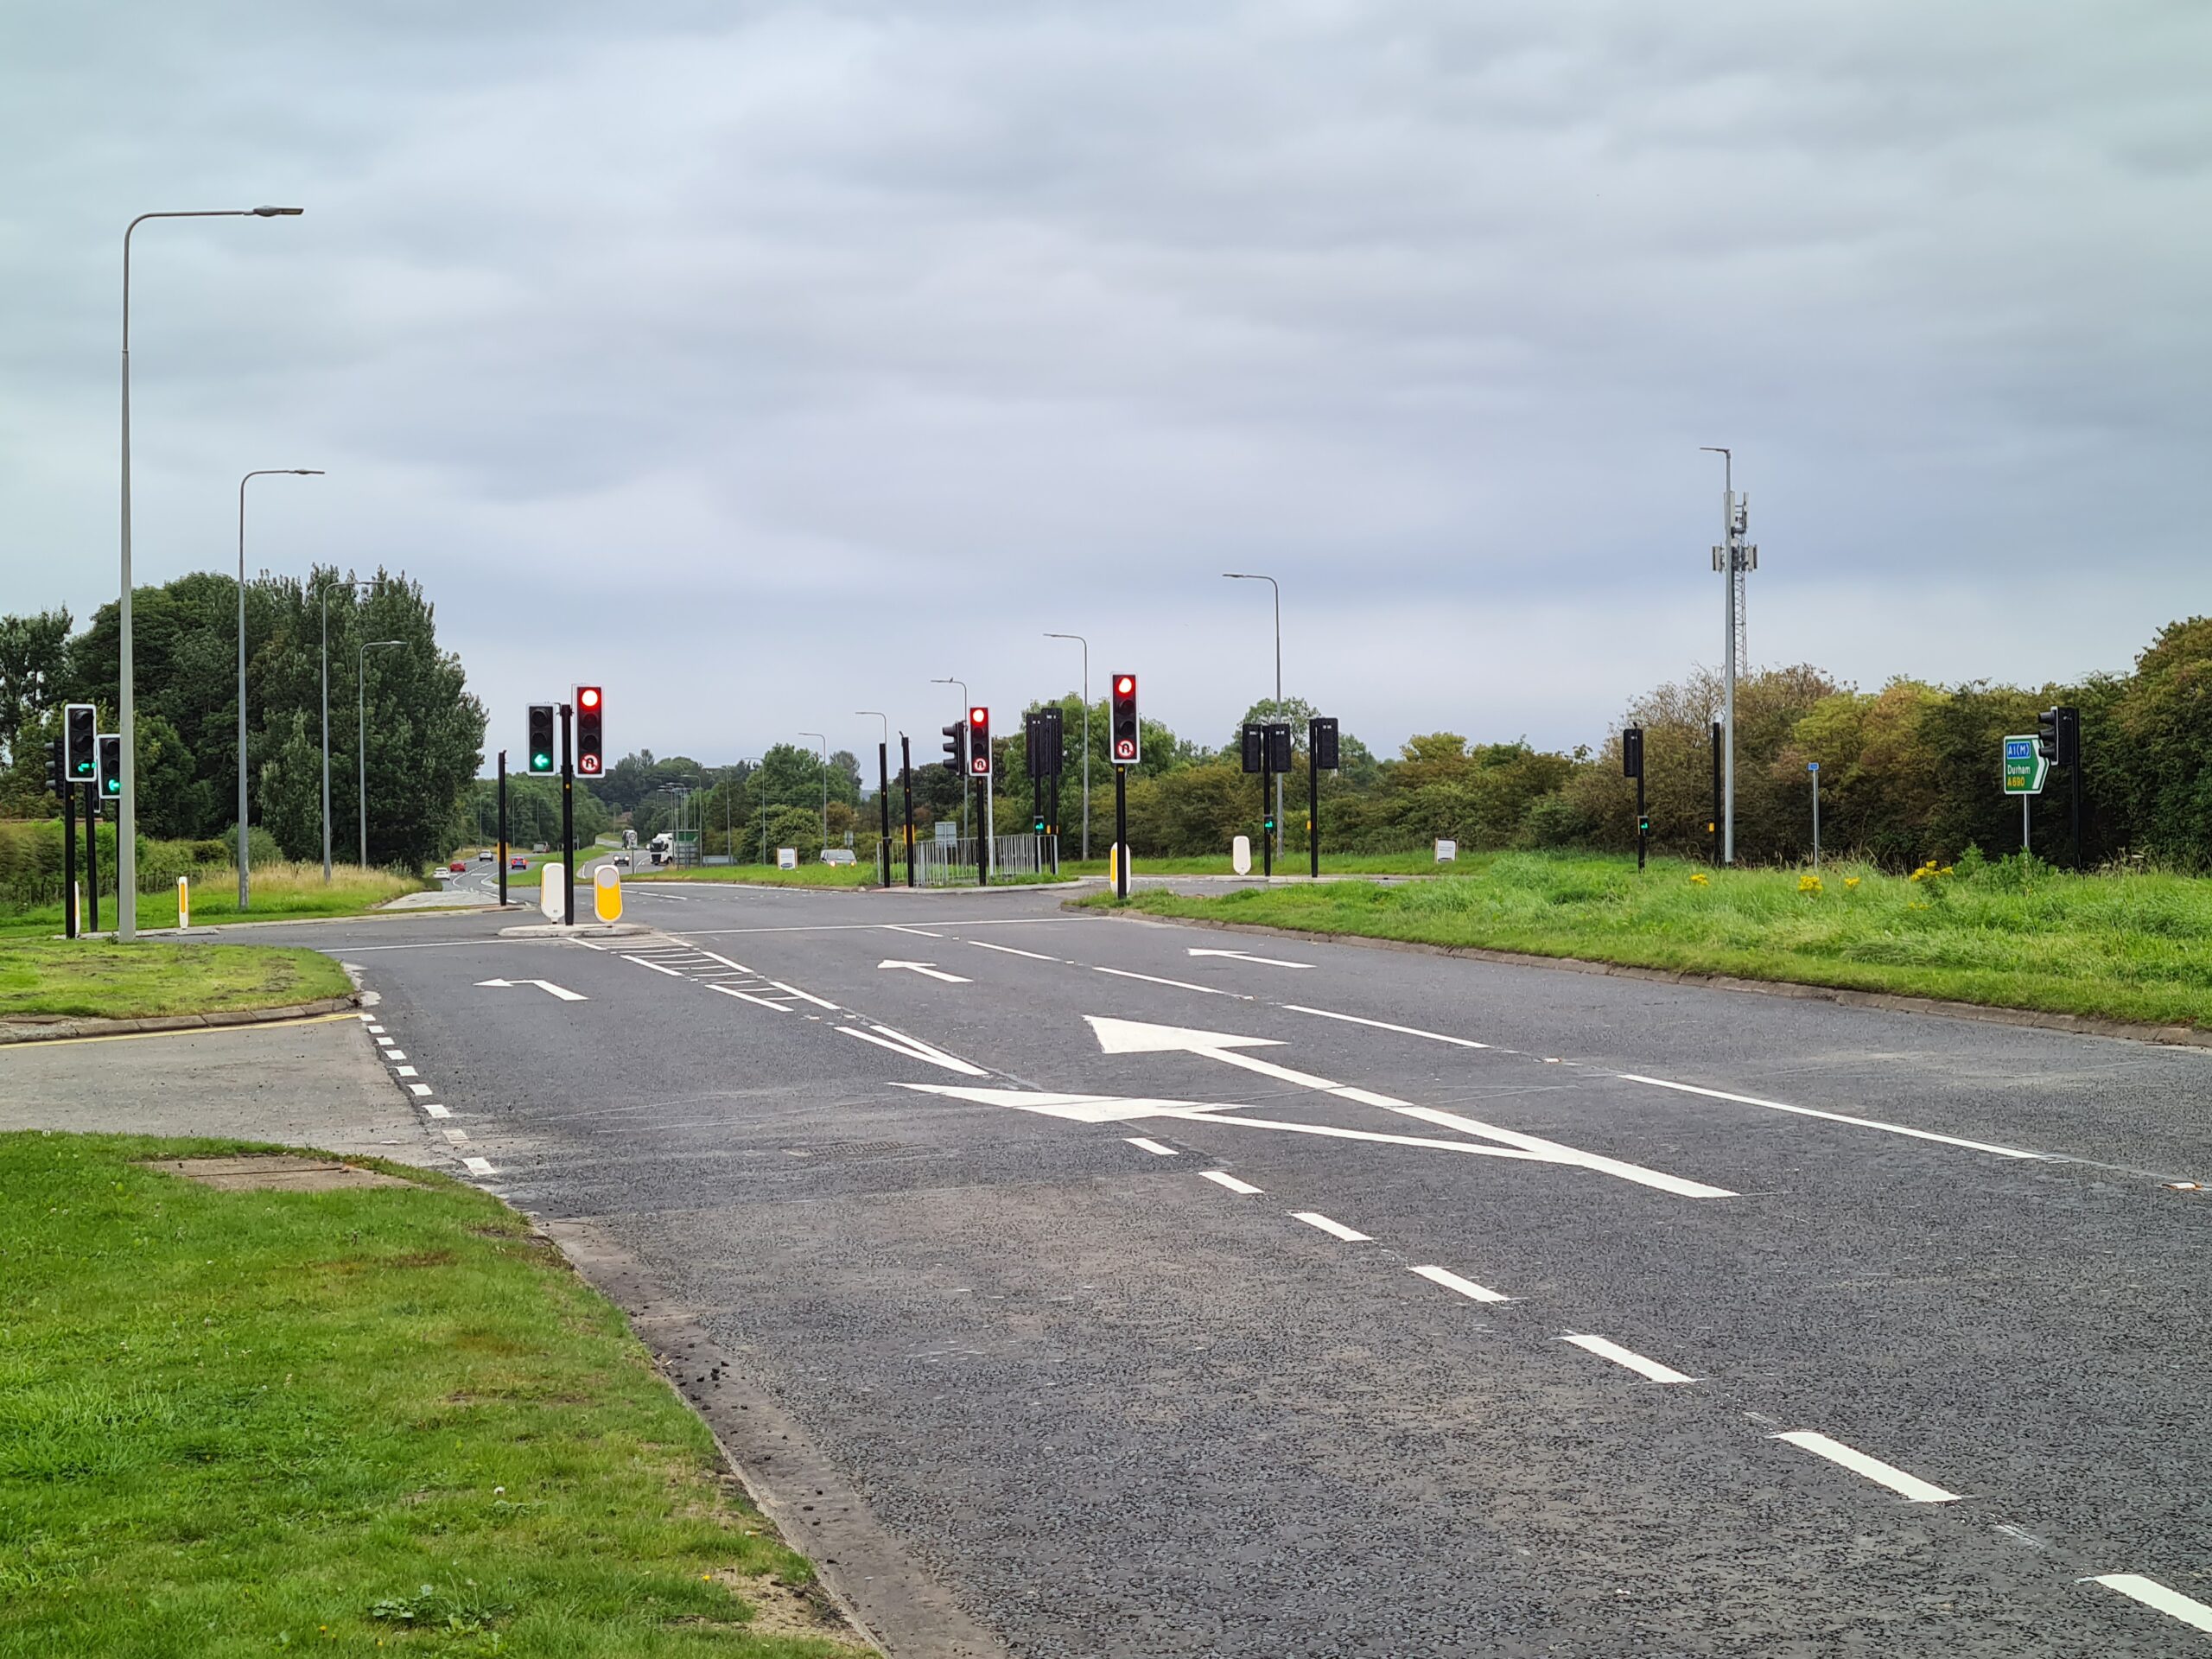 Ahead of Schedule: Traffic Light Installation on A690 Near West Rainton Completed 